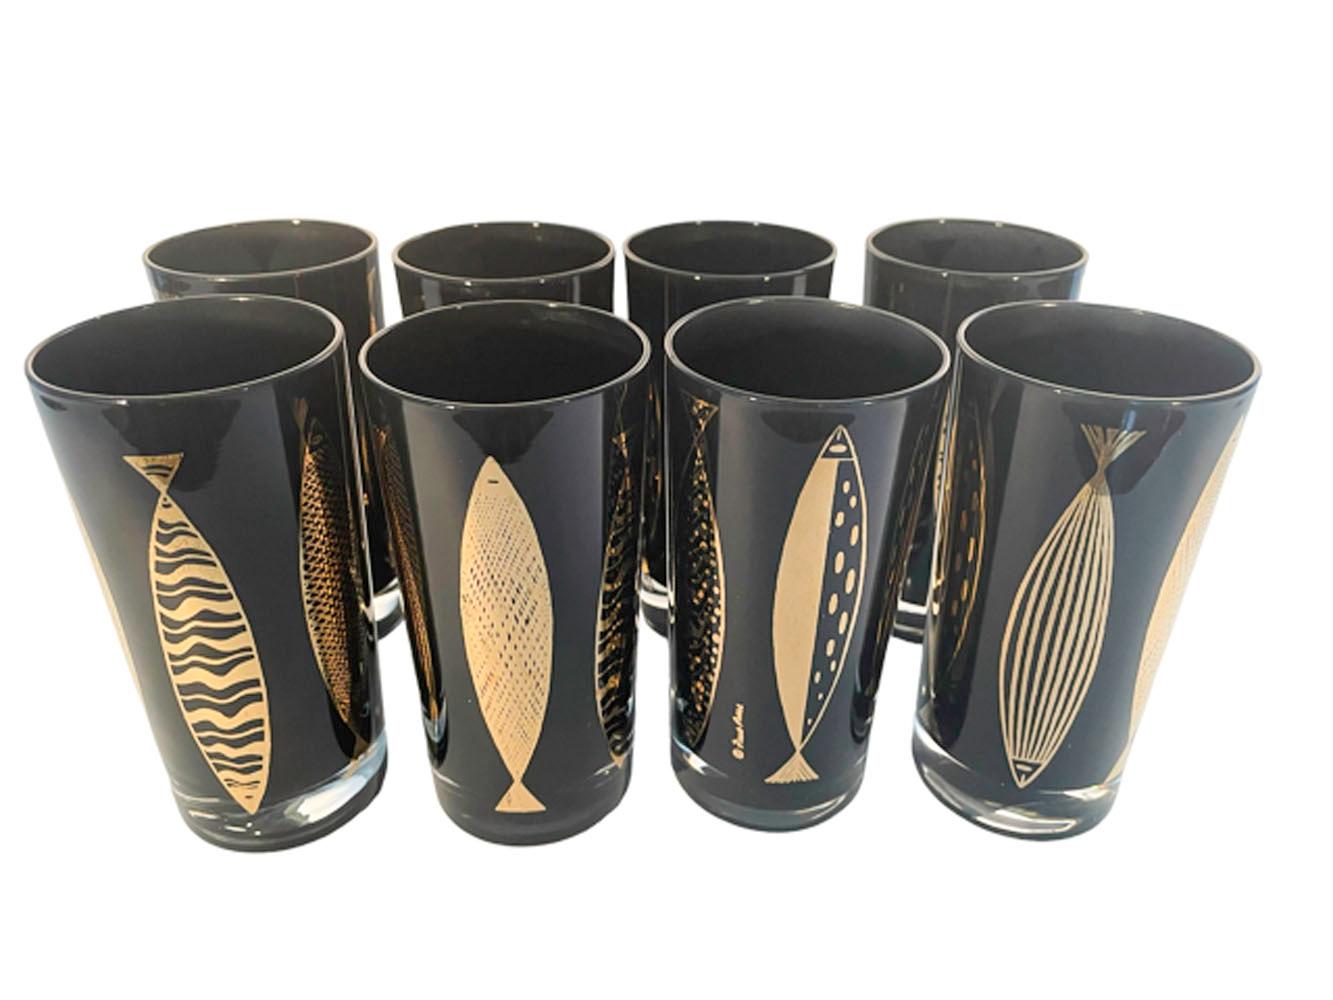 Eight Mid-Century Modern highball glasses designed by Fred Press, with 22k gold fish in different abstract patterns, vertically placed around each glass. The glasses are clear glass with the interiors frosted black creating a high gloss appearance